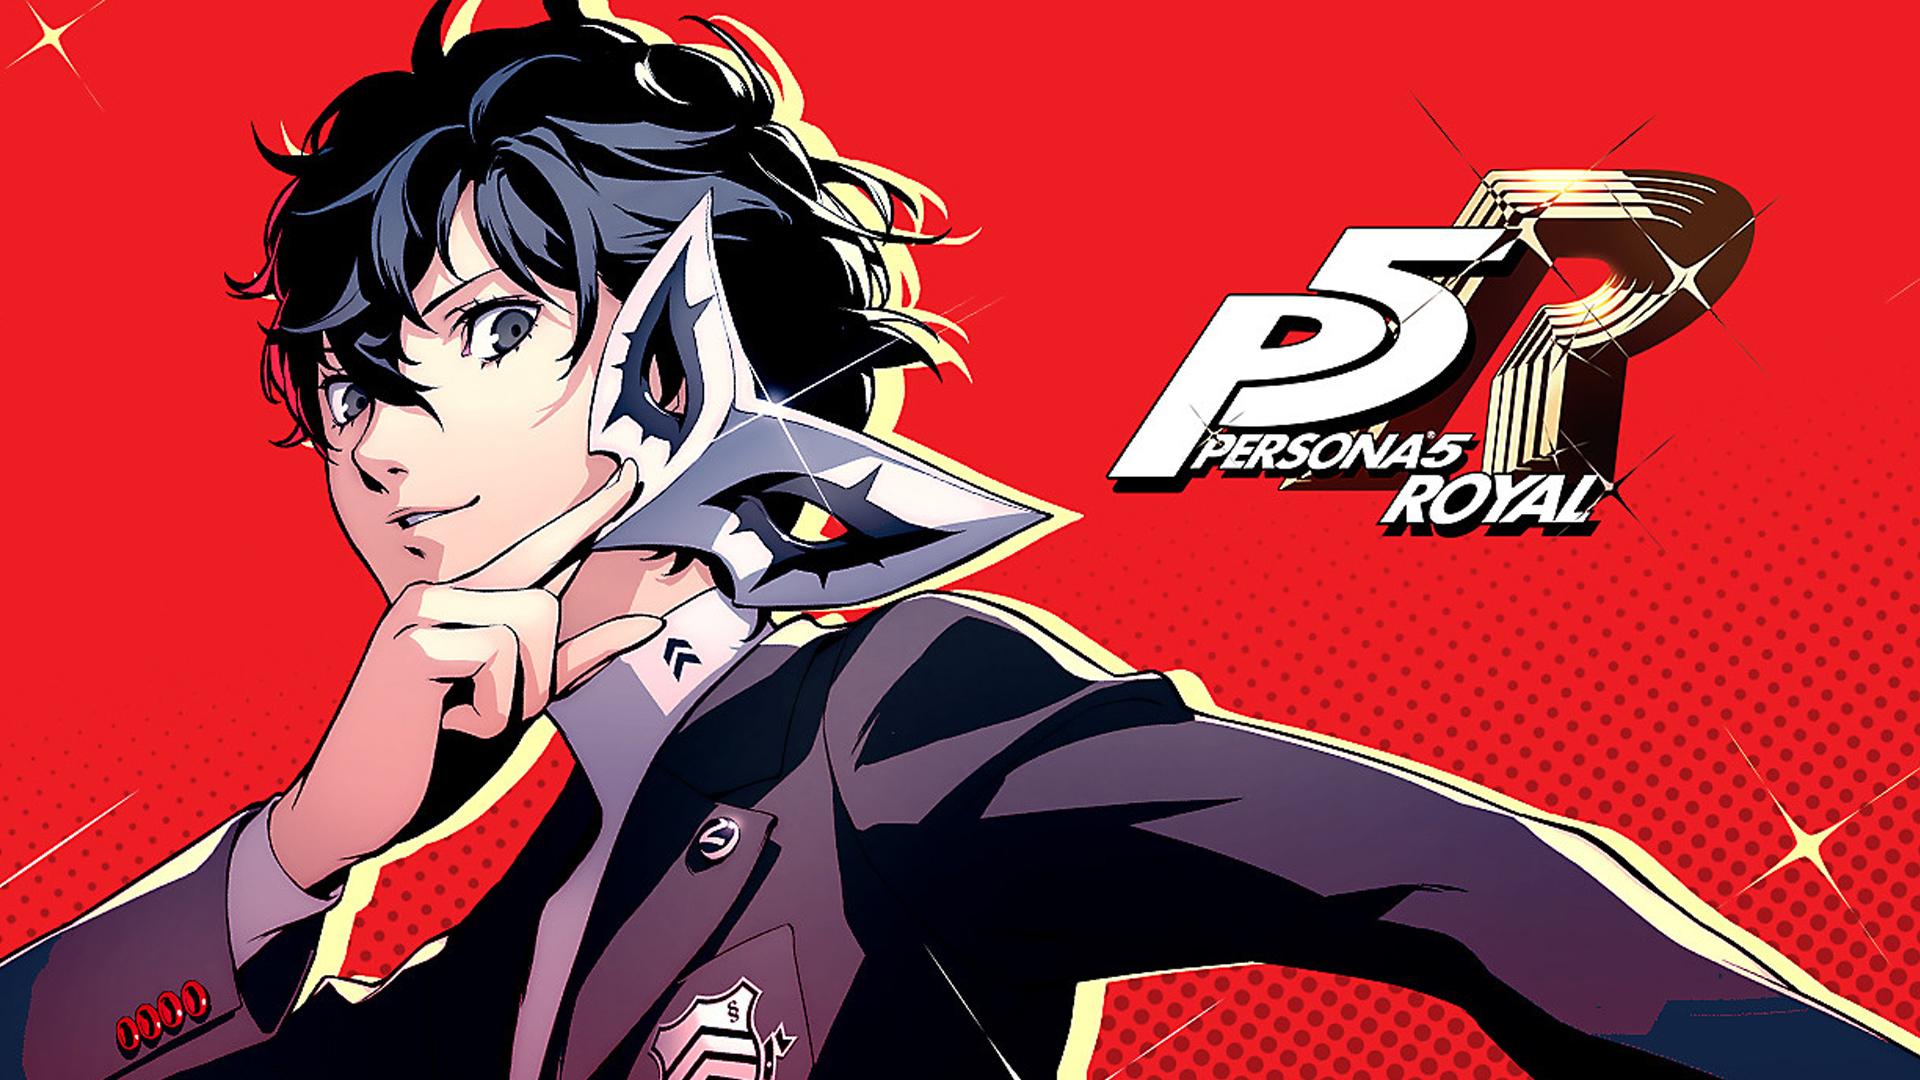 Everything You to Know About Persona 5 Royal: Editions, Download Size, Free DLC, New Content, Enhancements, and More for PS4 Pro • The Mako Reactor